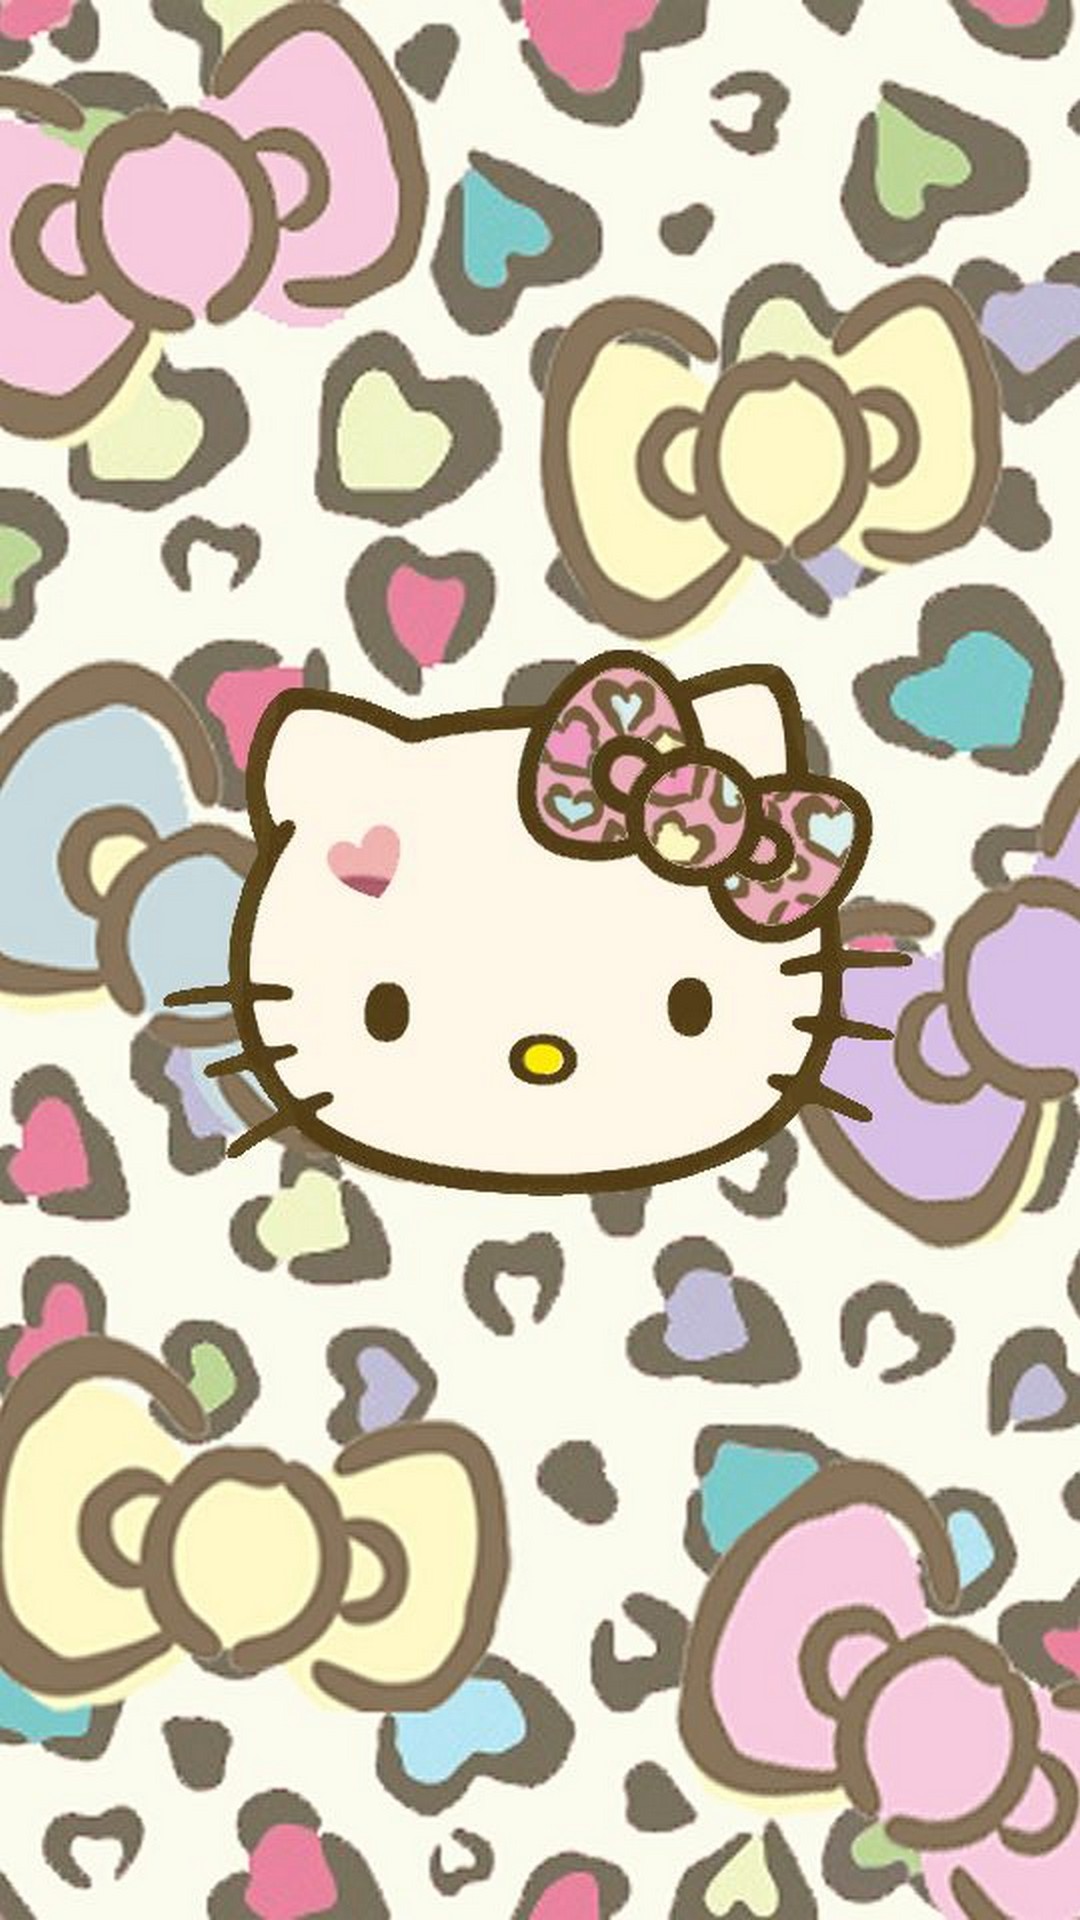 Hello Kitty Pictures Wallpaper iPhone with image resolution 1080x1920 pixel. You can make this wallpaper for your iPhone 5, 6, 7, 8, X backgrounds, Mobile Screensaver, or iPad Lock Screen